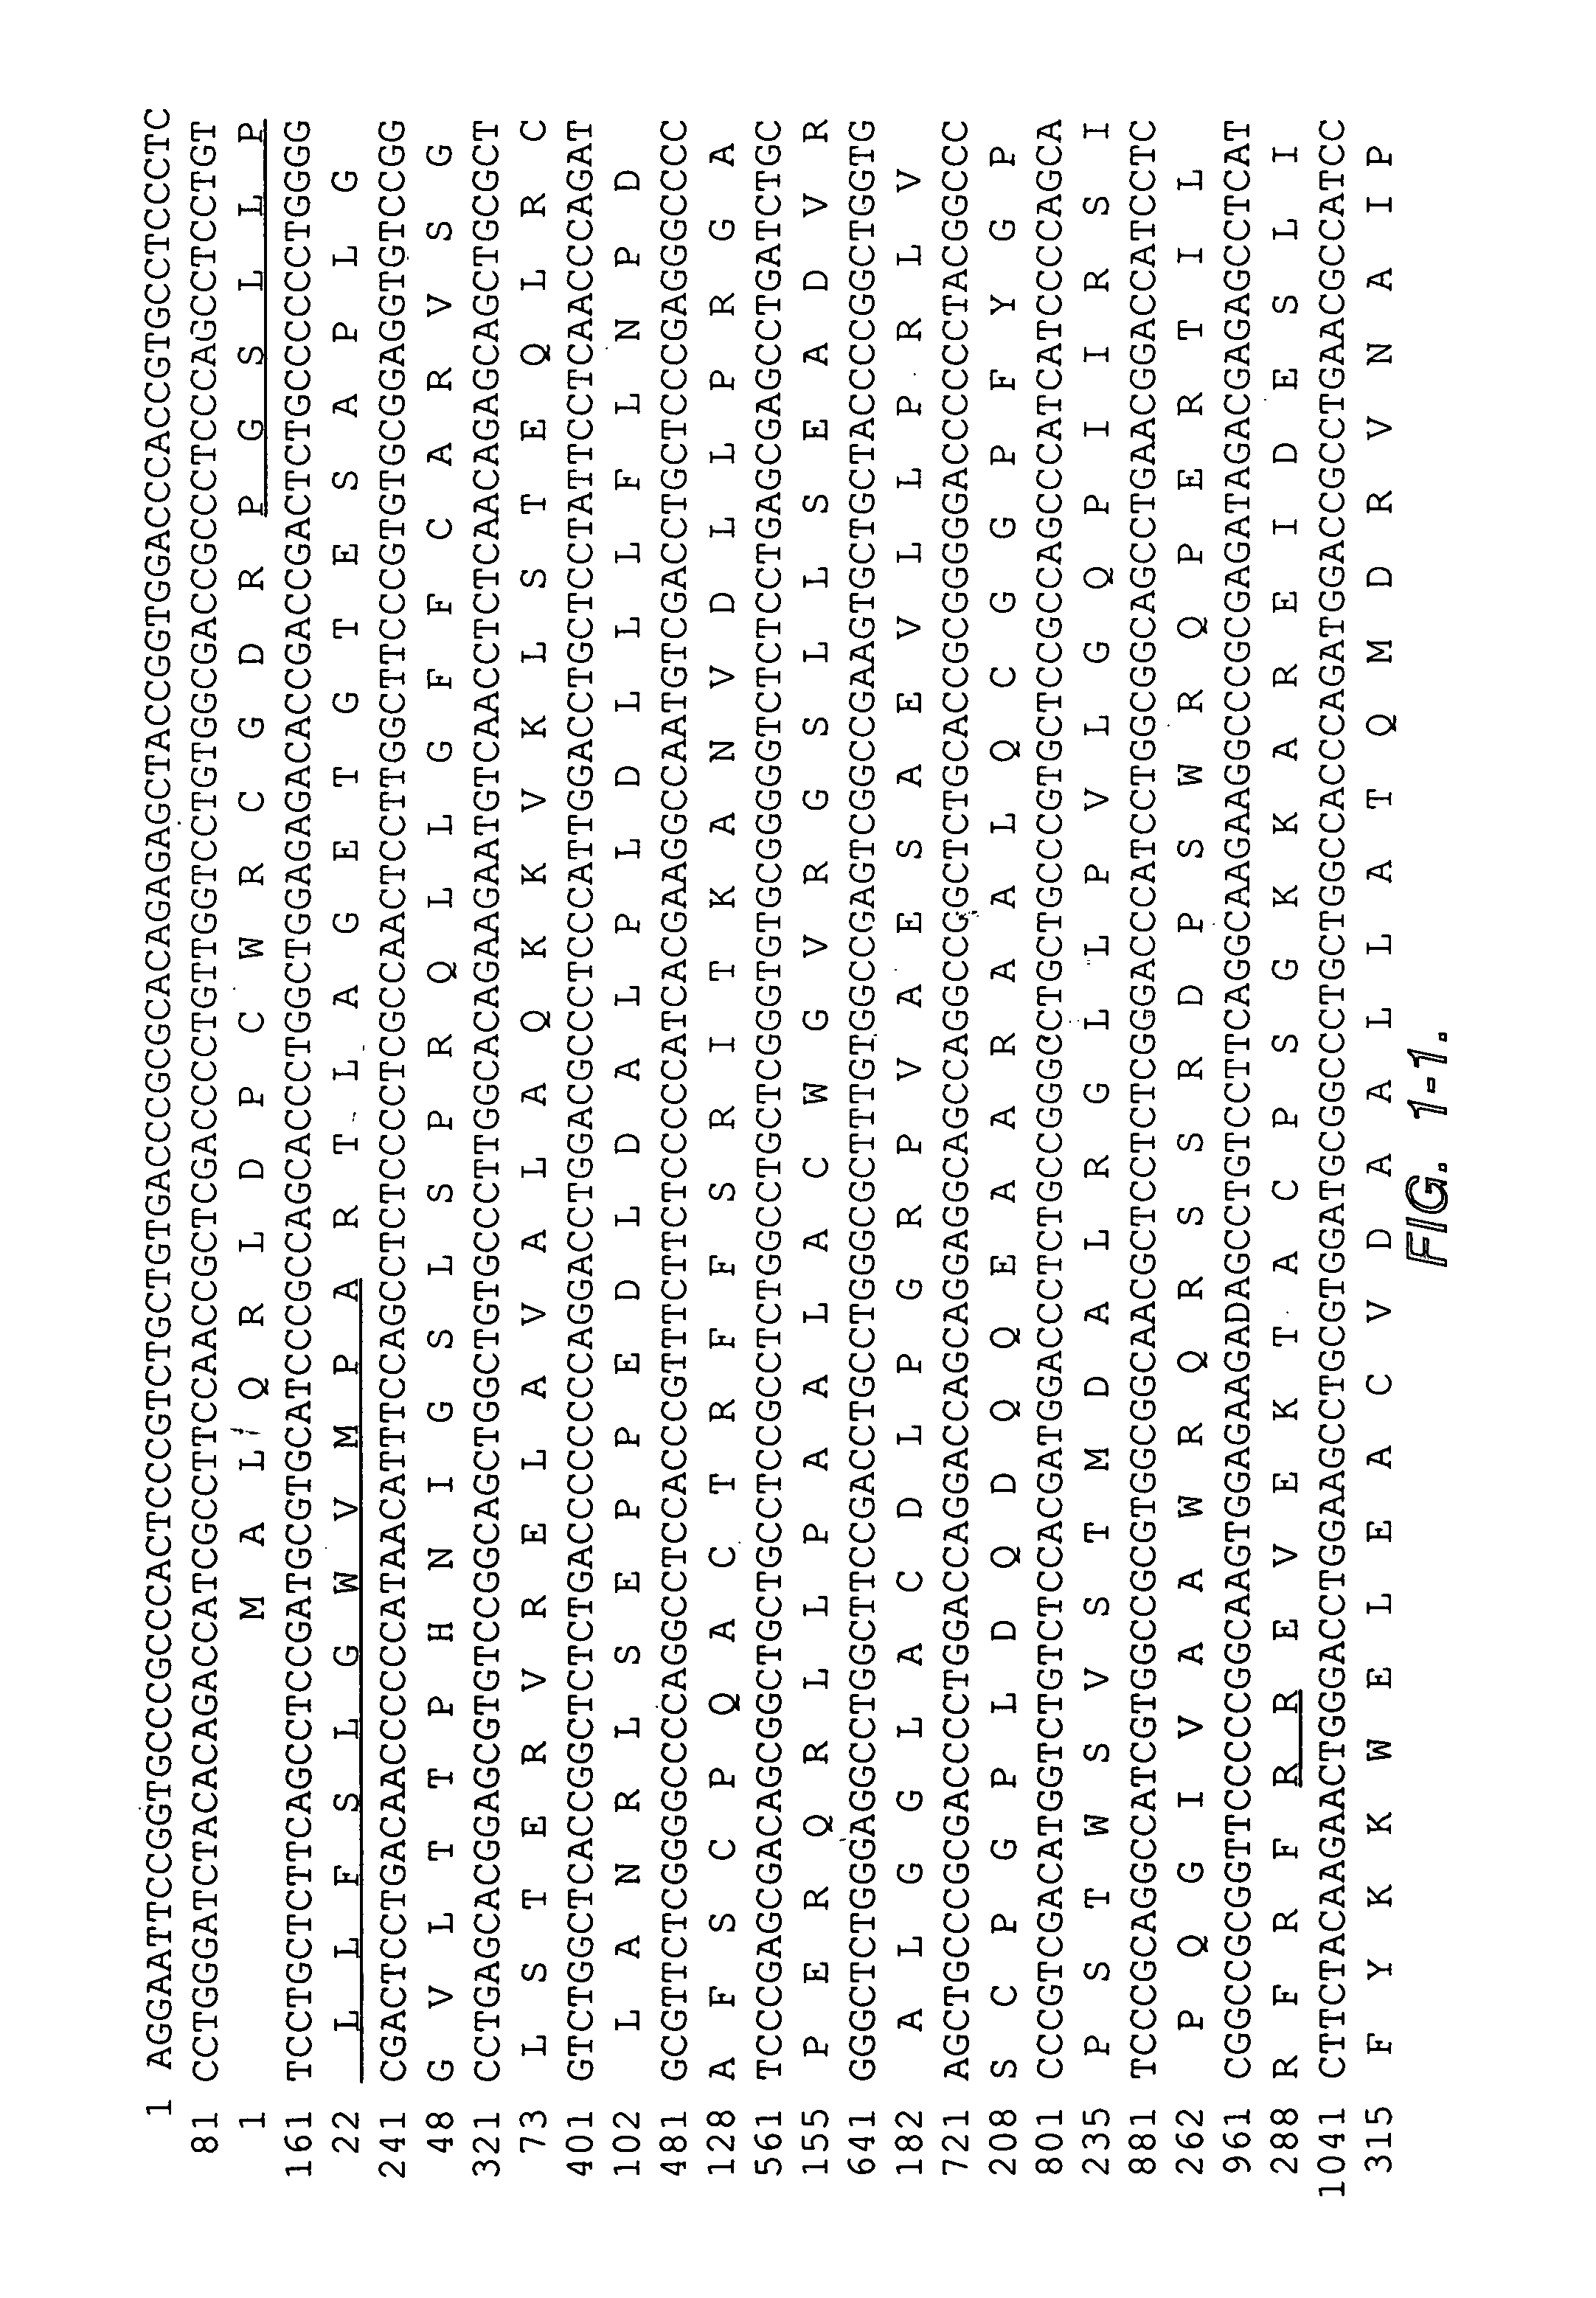 Mesothelin, immunogenic peptides derived therefrom, and compositions comprising mesothelin, or immunogenic peptides thereof